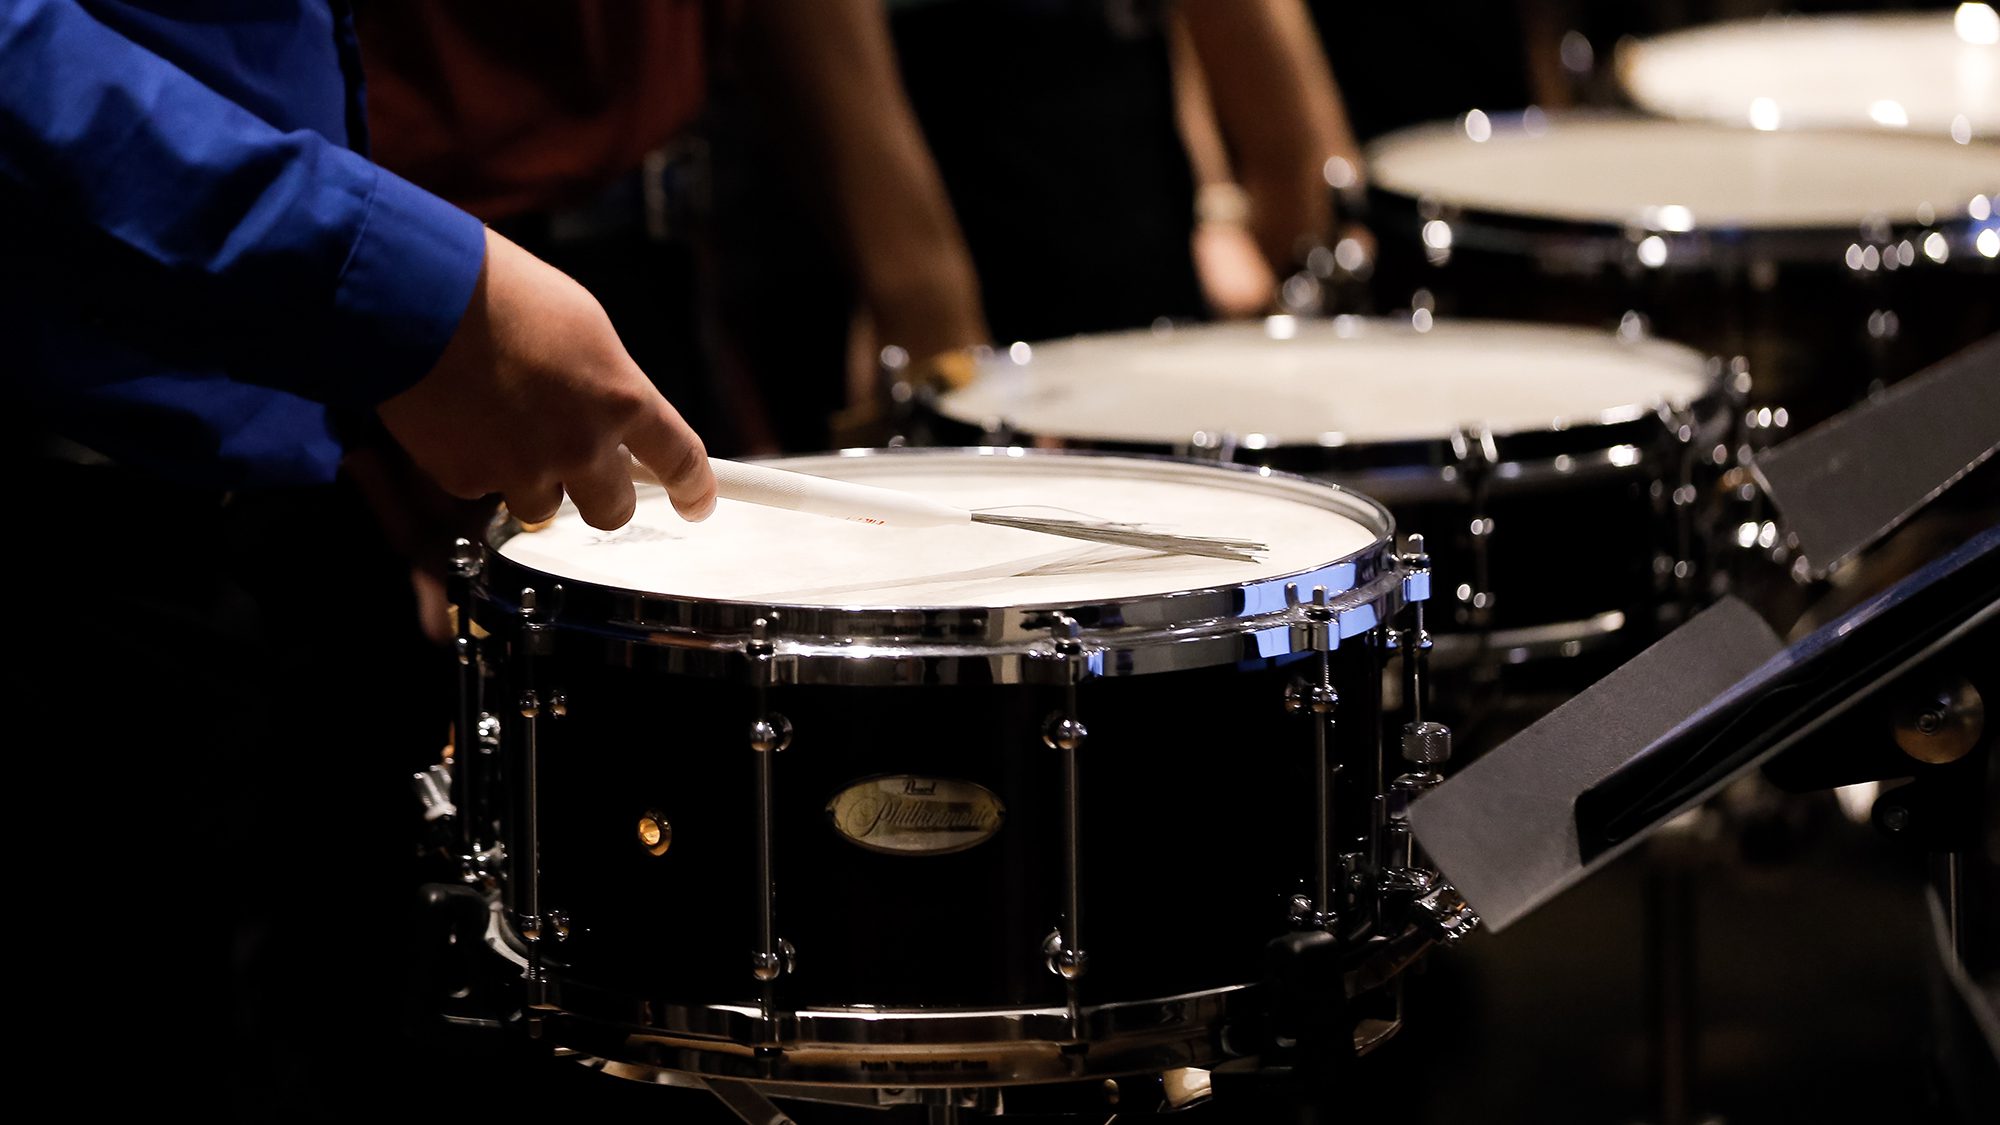 Four pairs of hands holding drumsticks play on four snare drums|Omar Carmenates